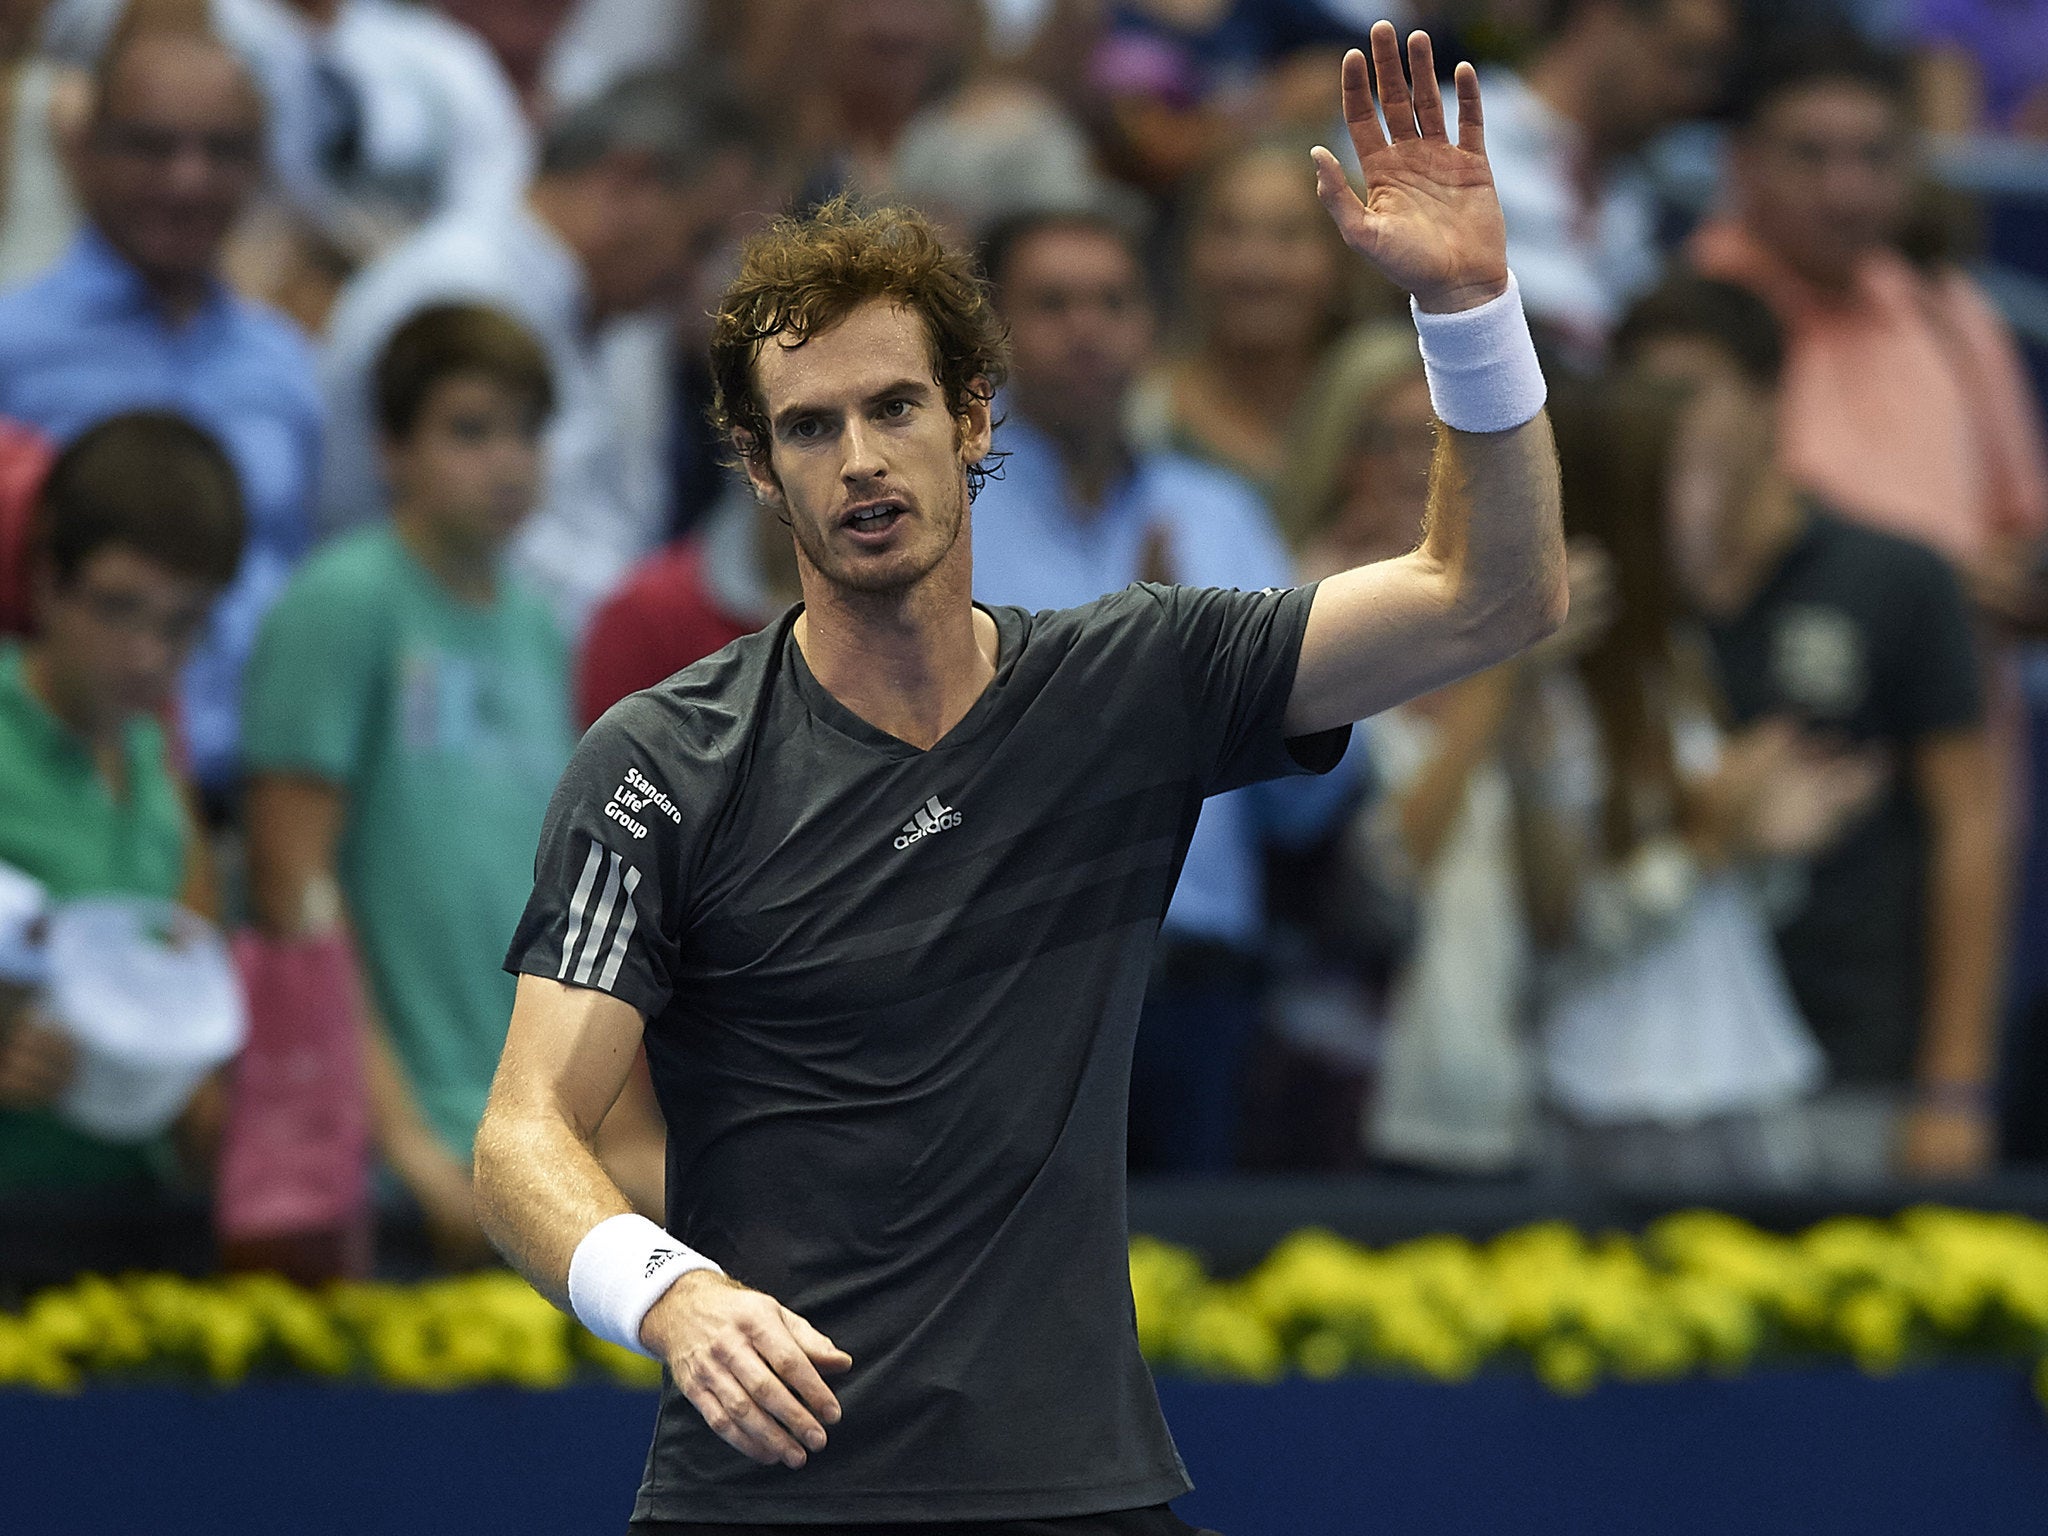 Andy Murray wins the Valencia Open